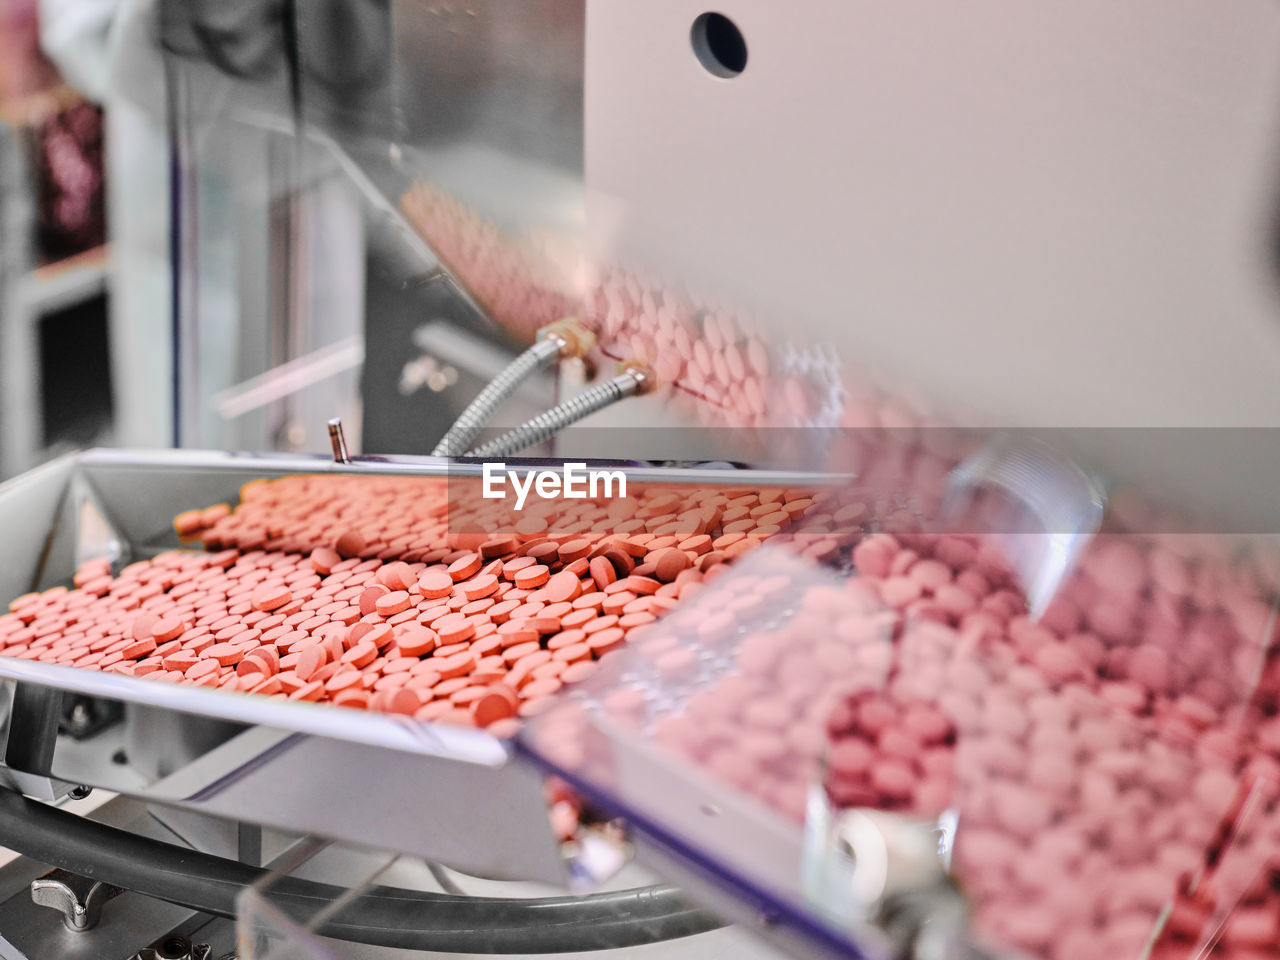 Contemporary pharmaceutical machine with piles of pink pills on conveyor placed in manufacturing laboratory